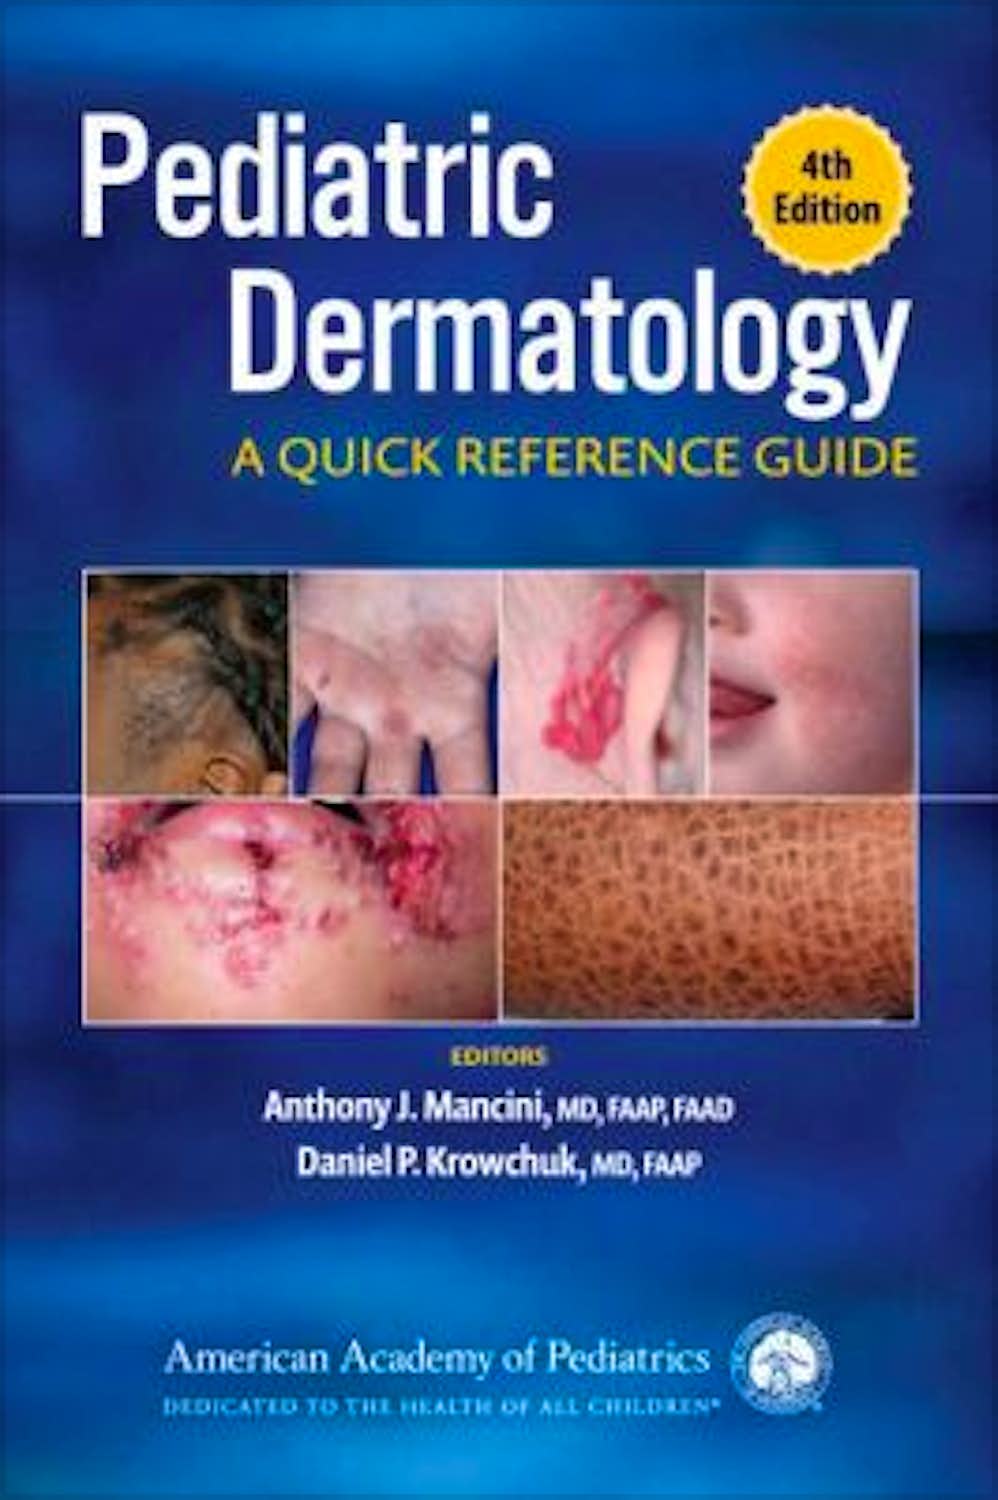 Pediatric Dermatology. A Quick Reference Guide